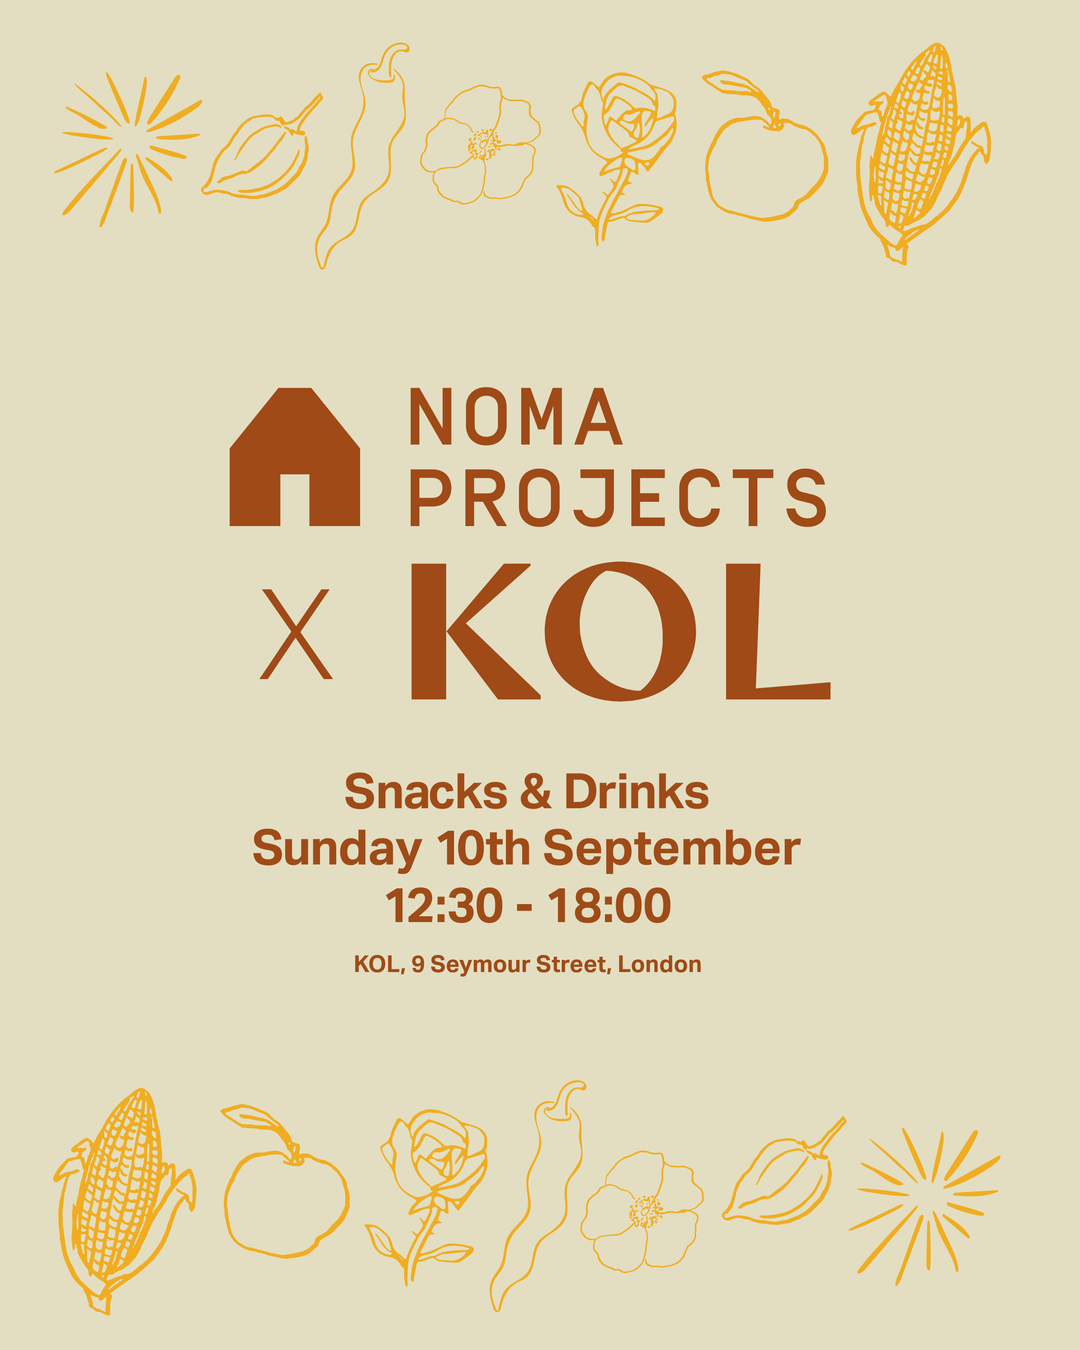 The promotional poster for Noma Projects' collaboration with Kol.